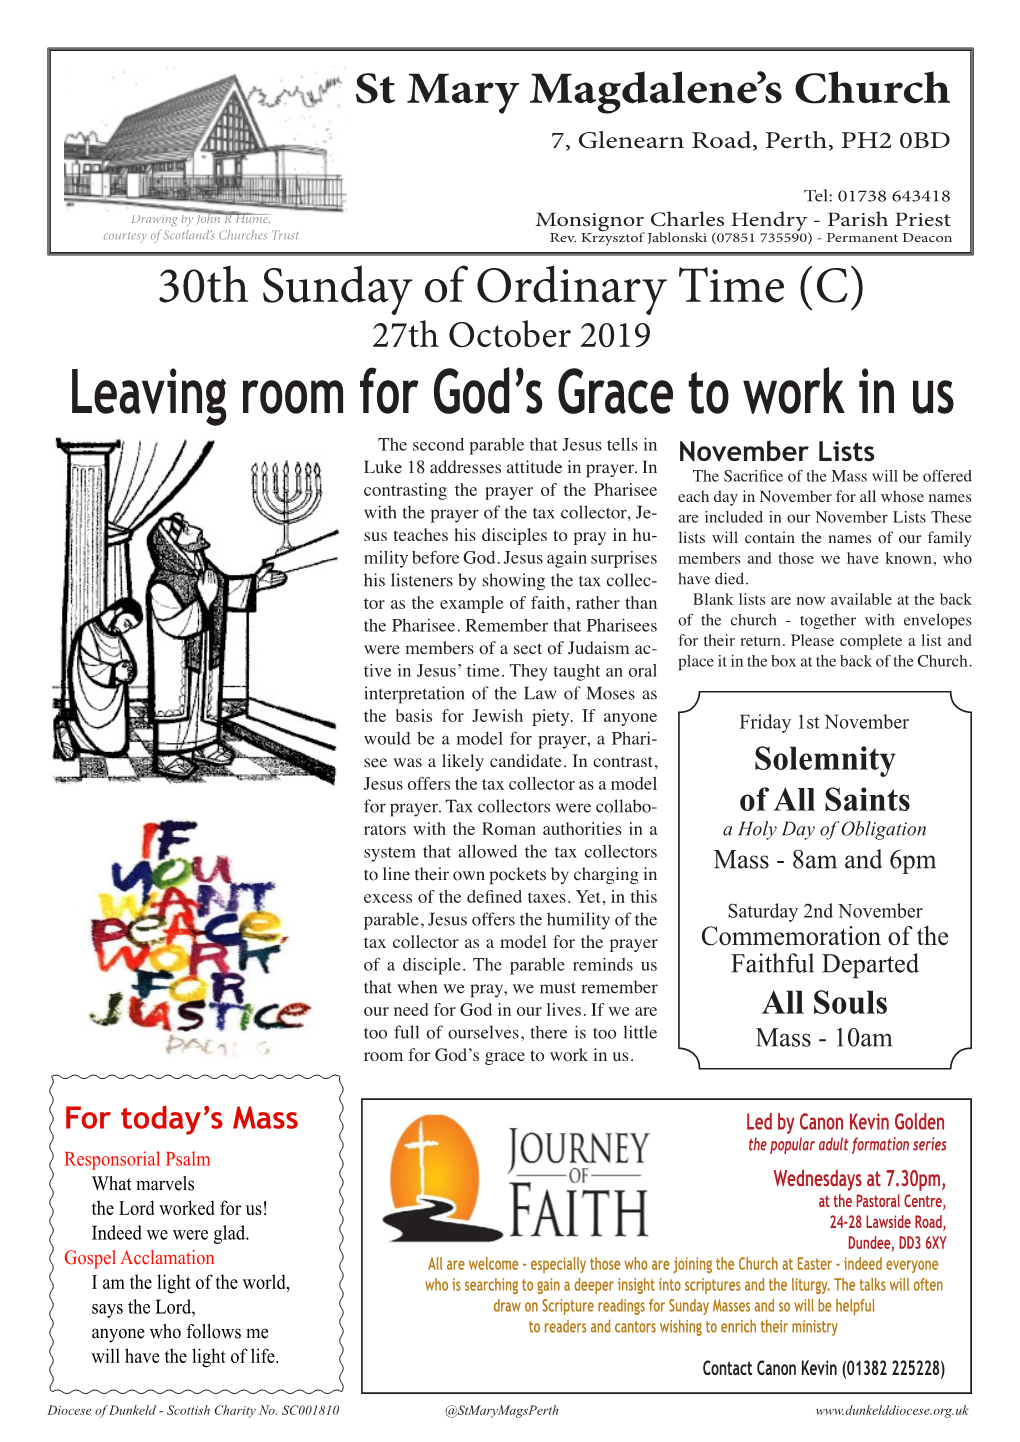 Leaving Room for God's Grace to Work in Us